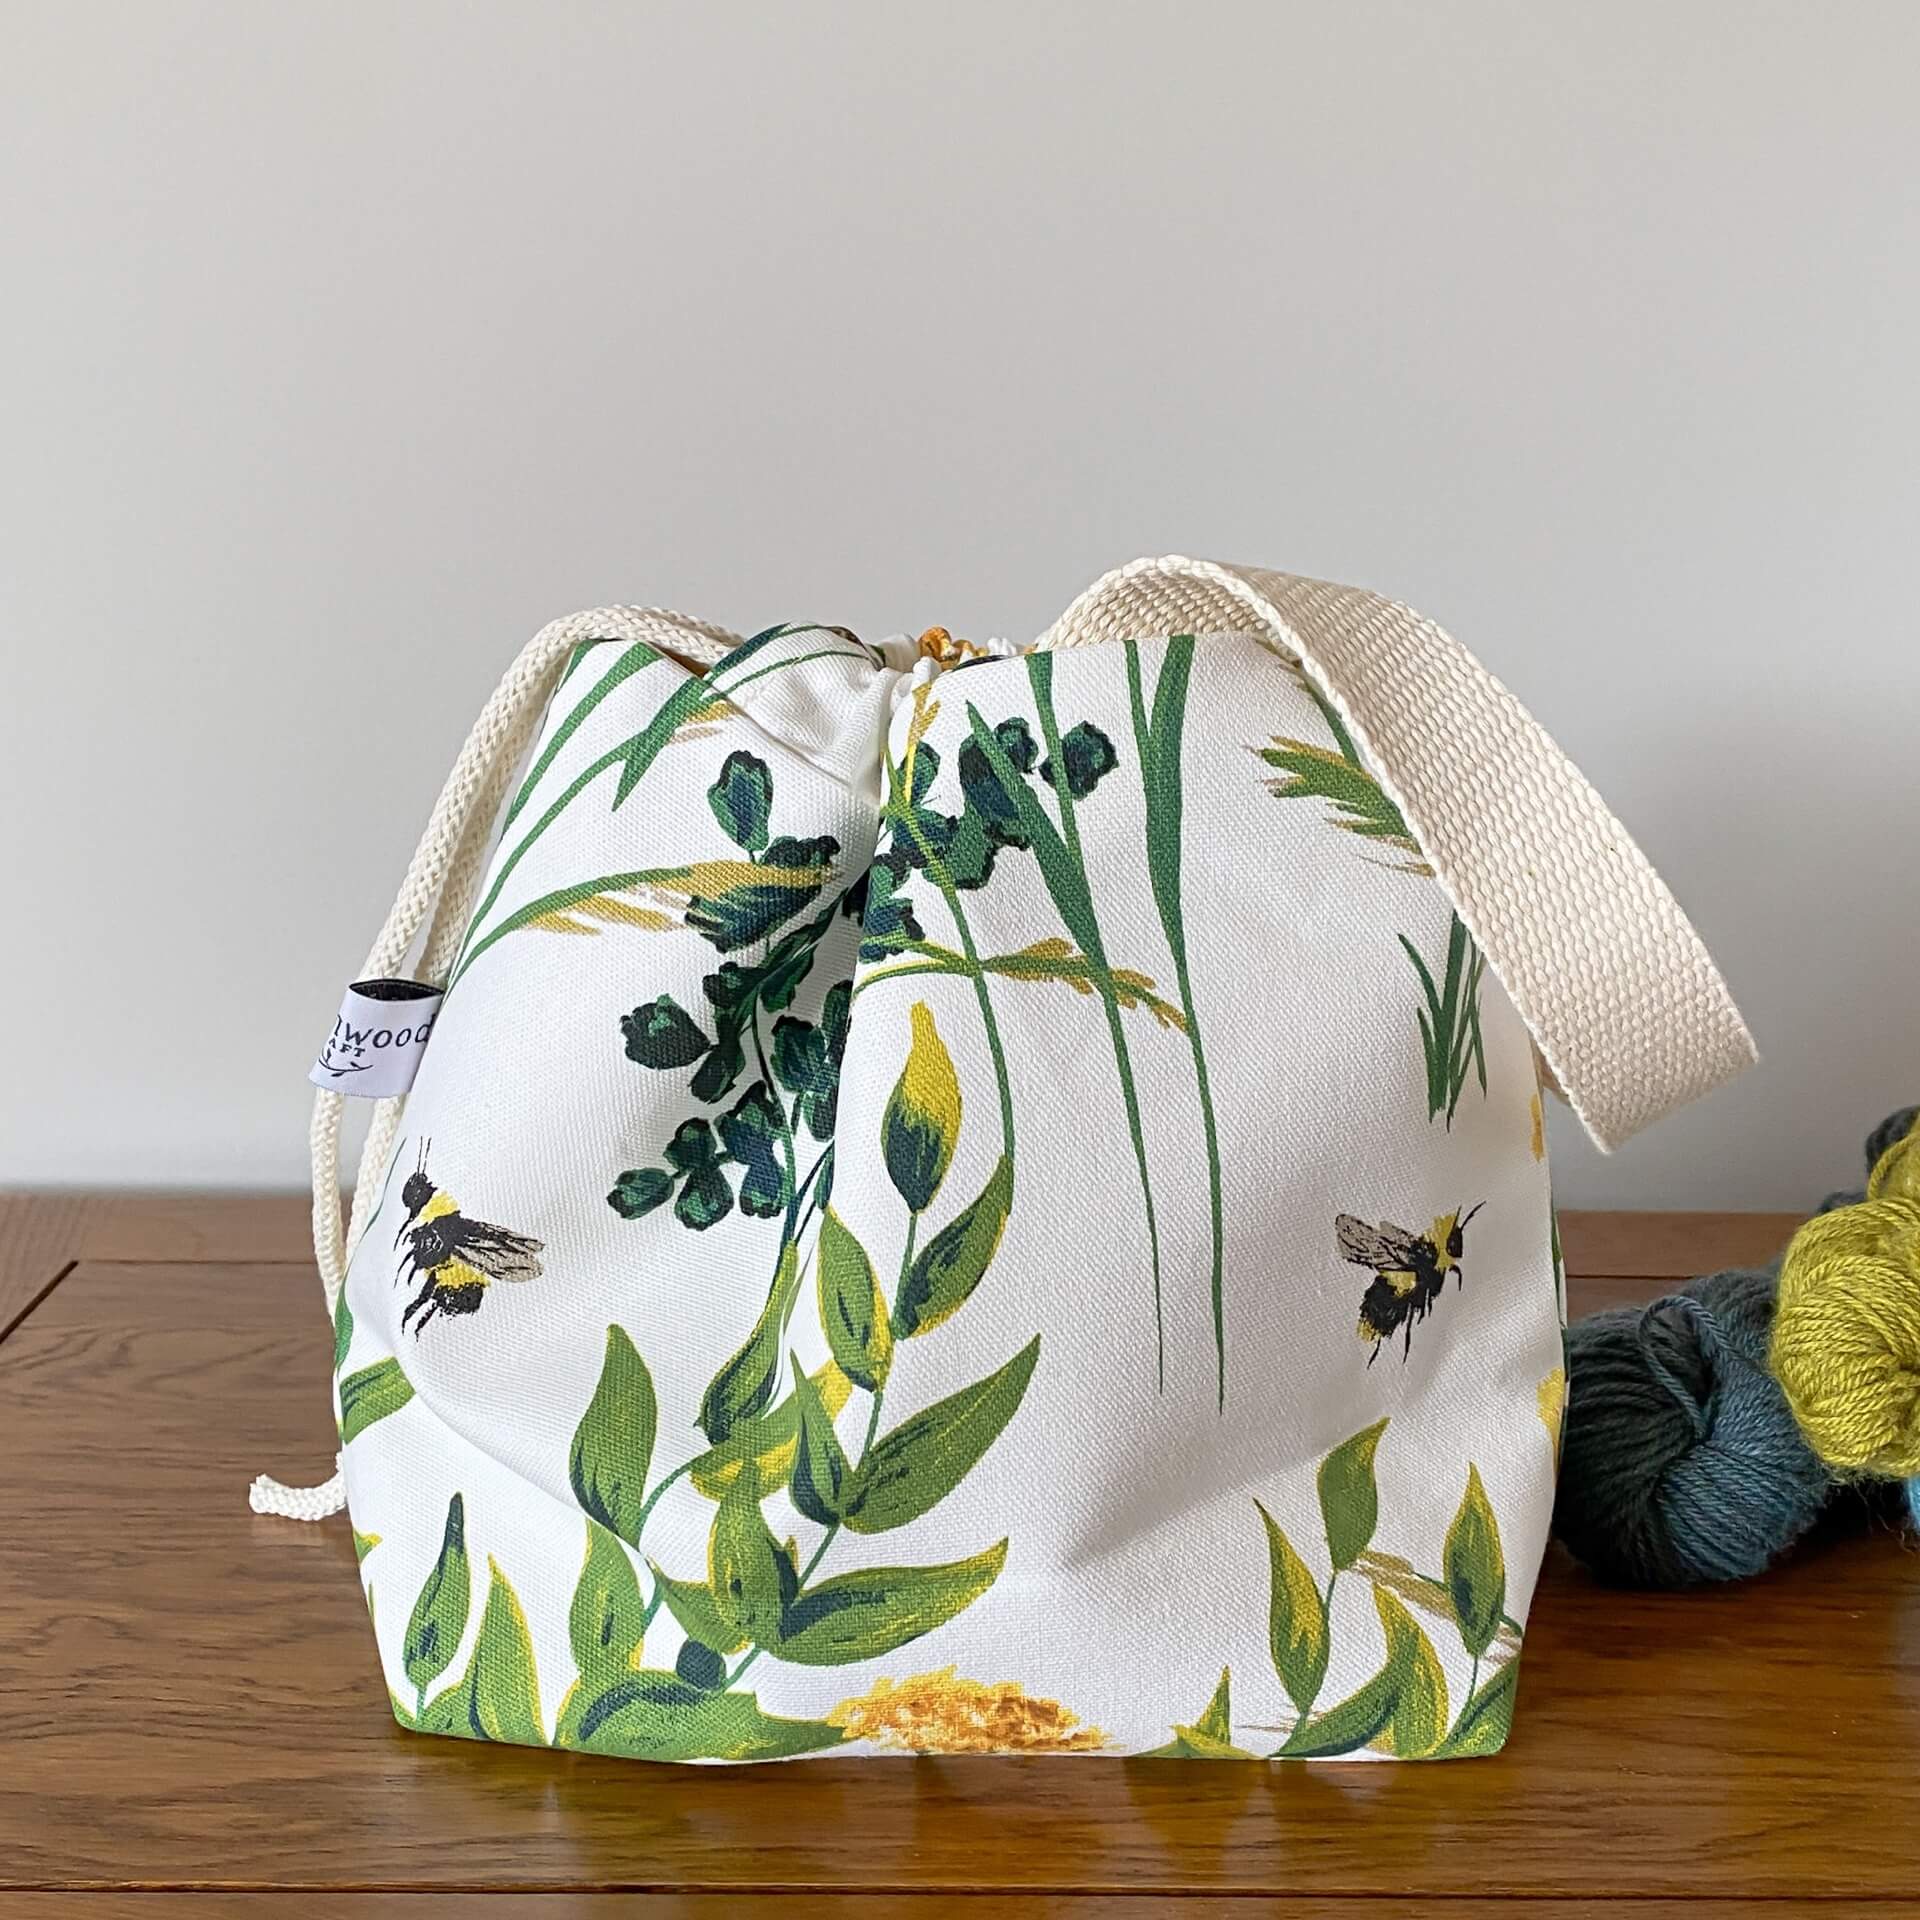 A knitting project bag sits on a table next to three skeins of yarn that are coloured in shades of blue and green. The bag is made froma fabric that shows summer foliage and birds. Prominentare a couple of bumble bees. 